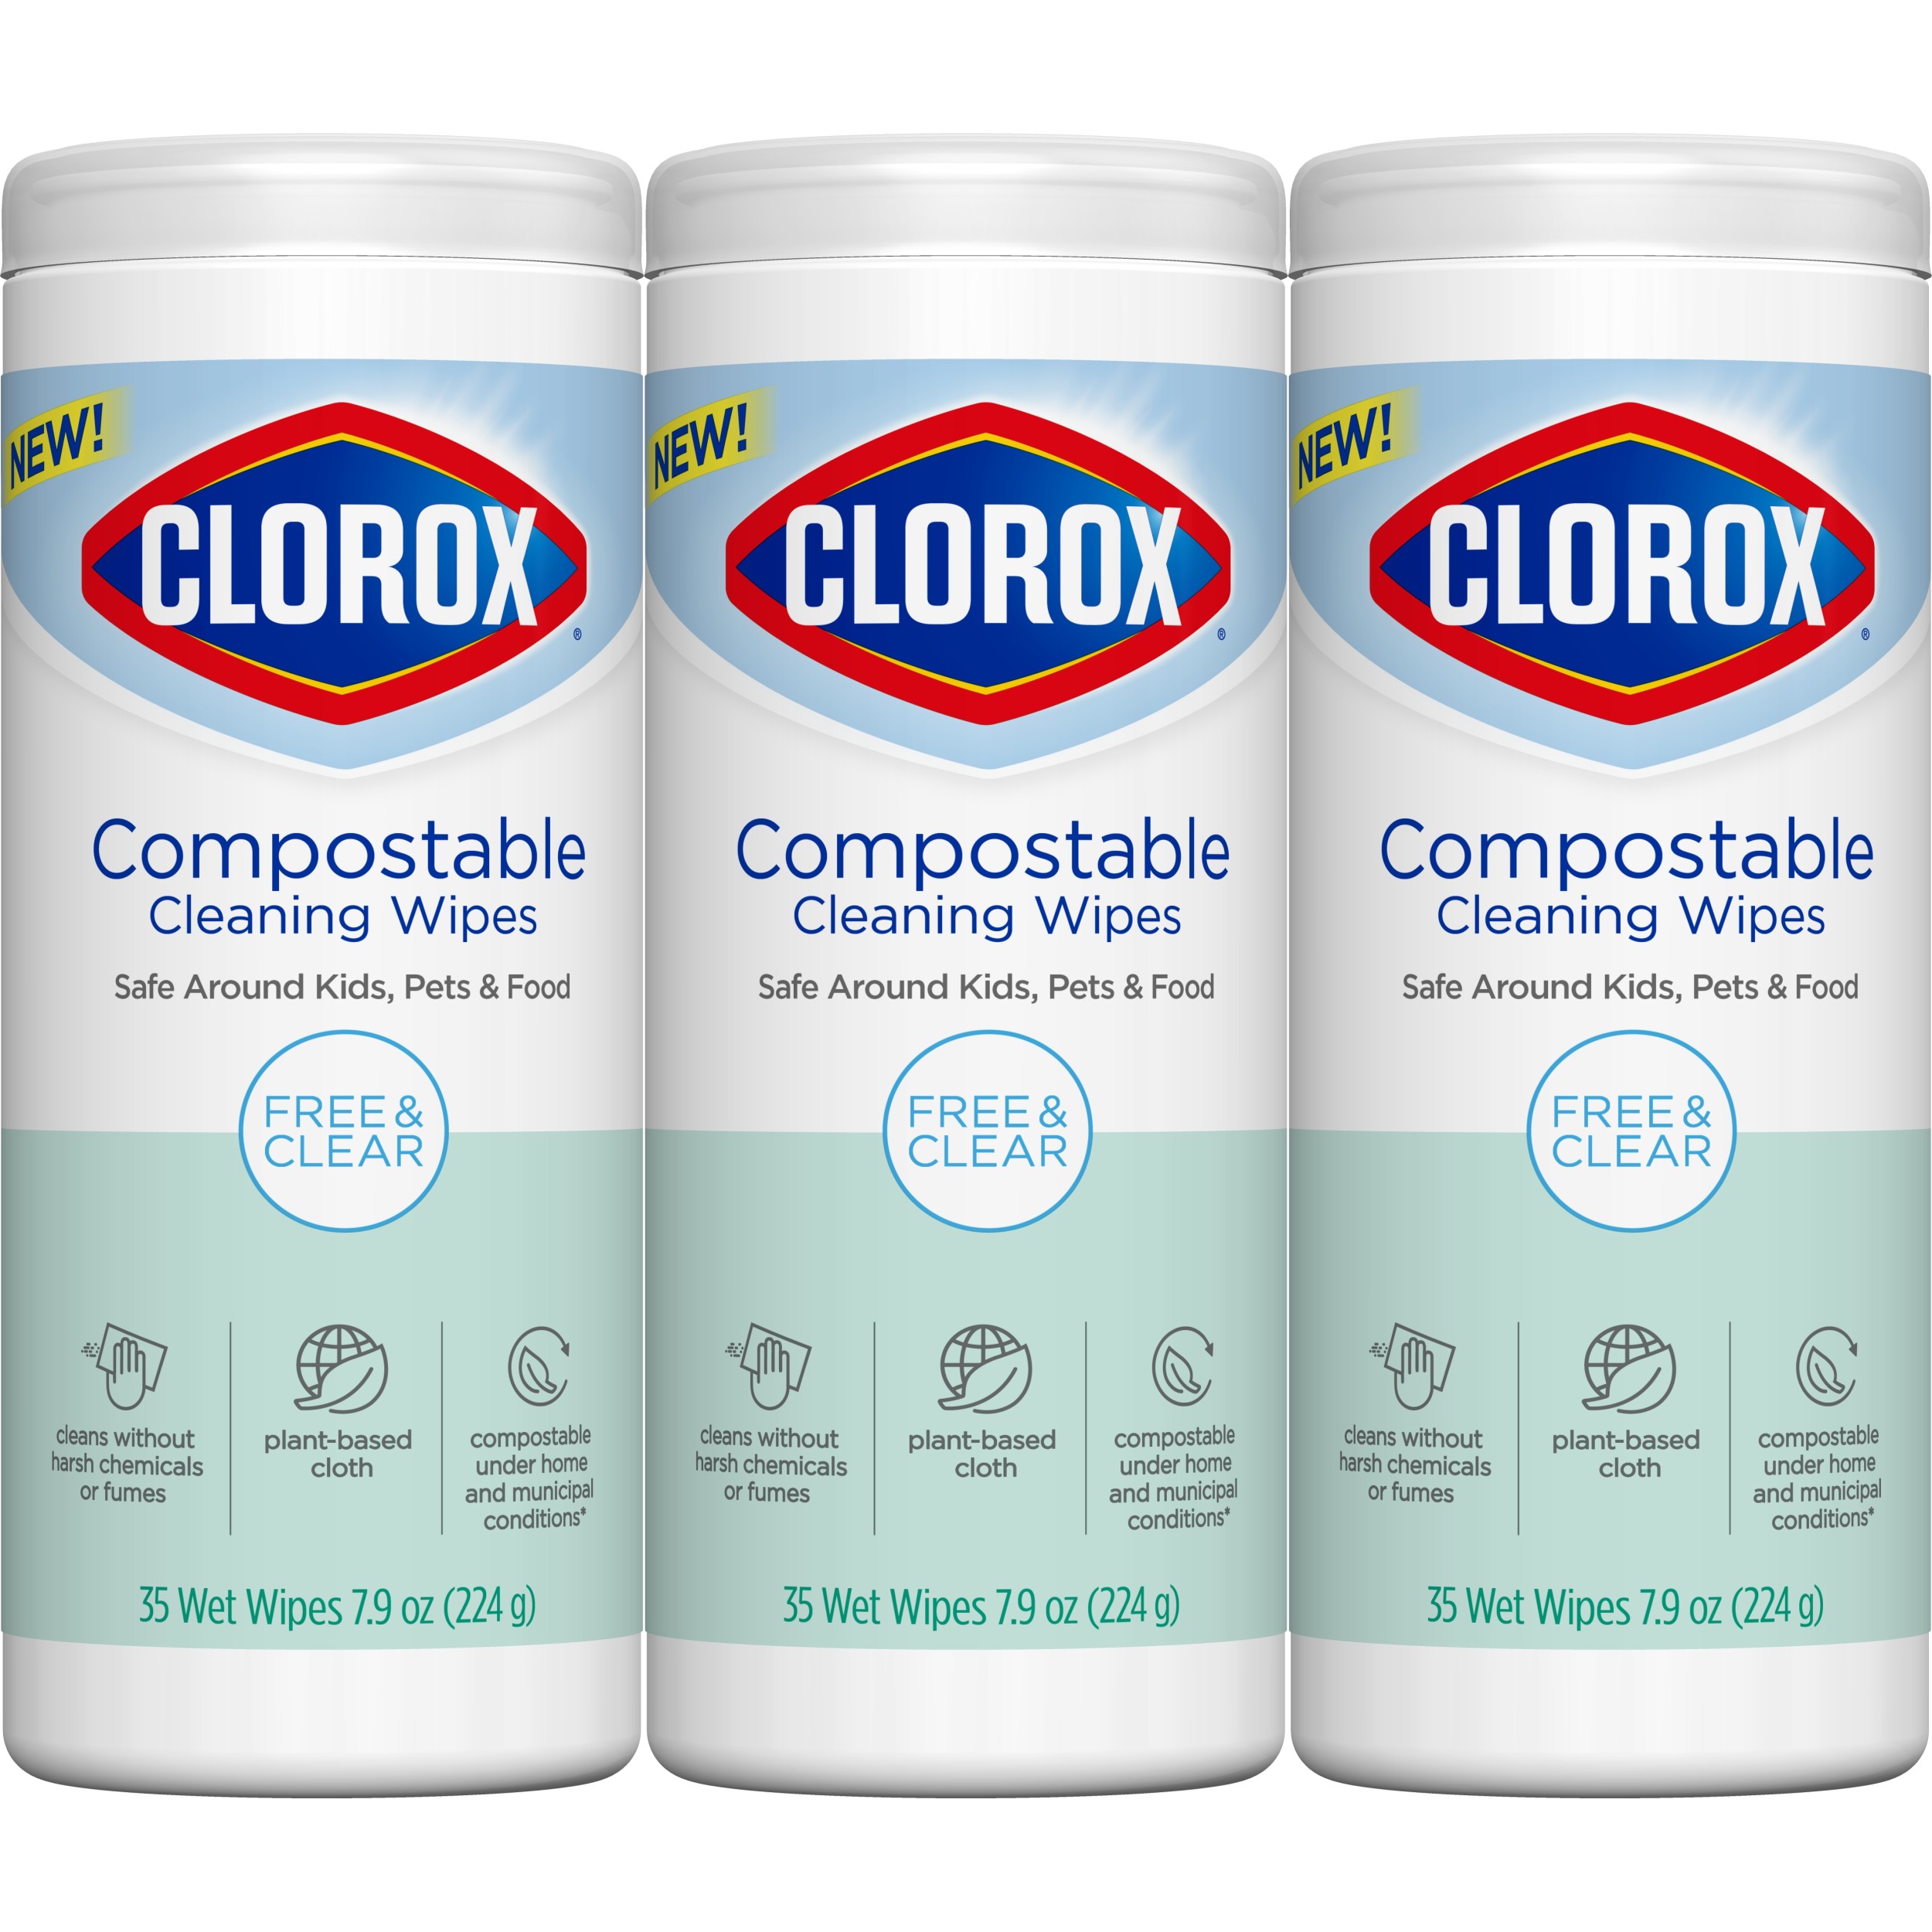 Clorox Compostable Cleaning Wipes - All Purpose Wipes - Unscented, Free & Clear, 35 Count Each - Pack of 3 - image 1 of 12